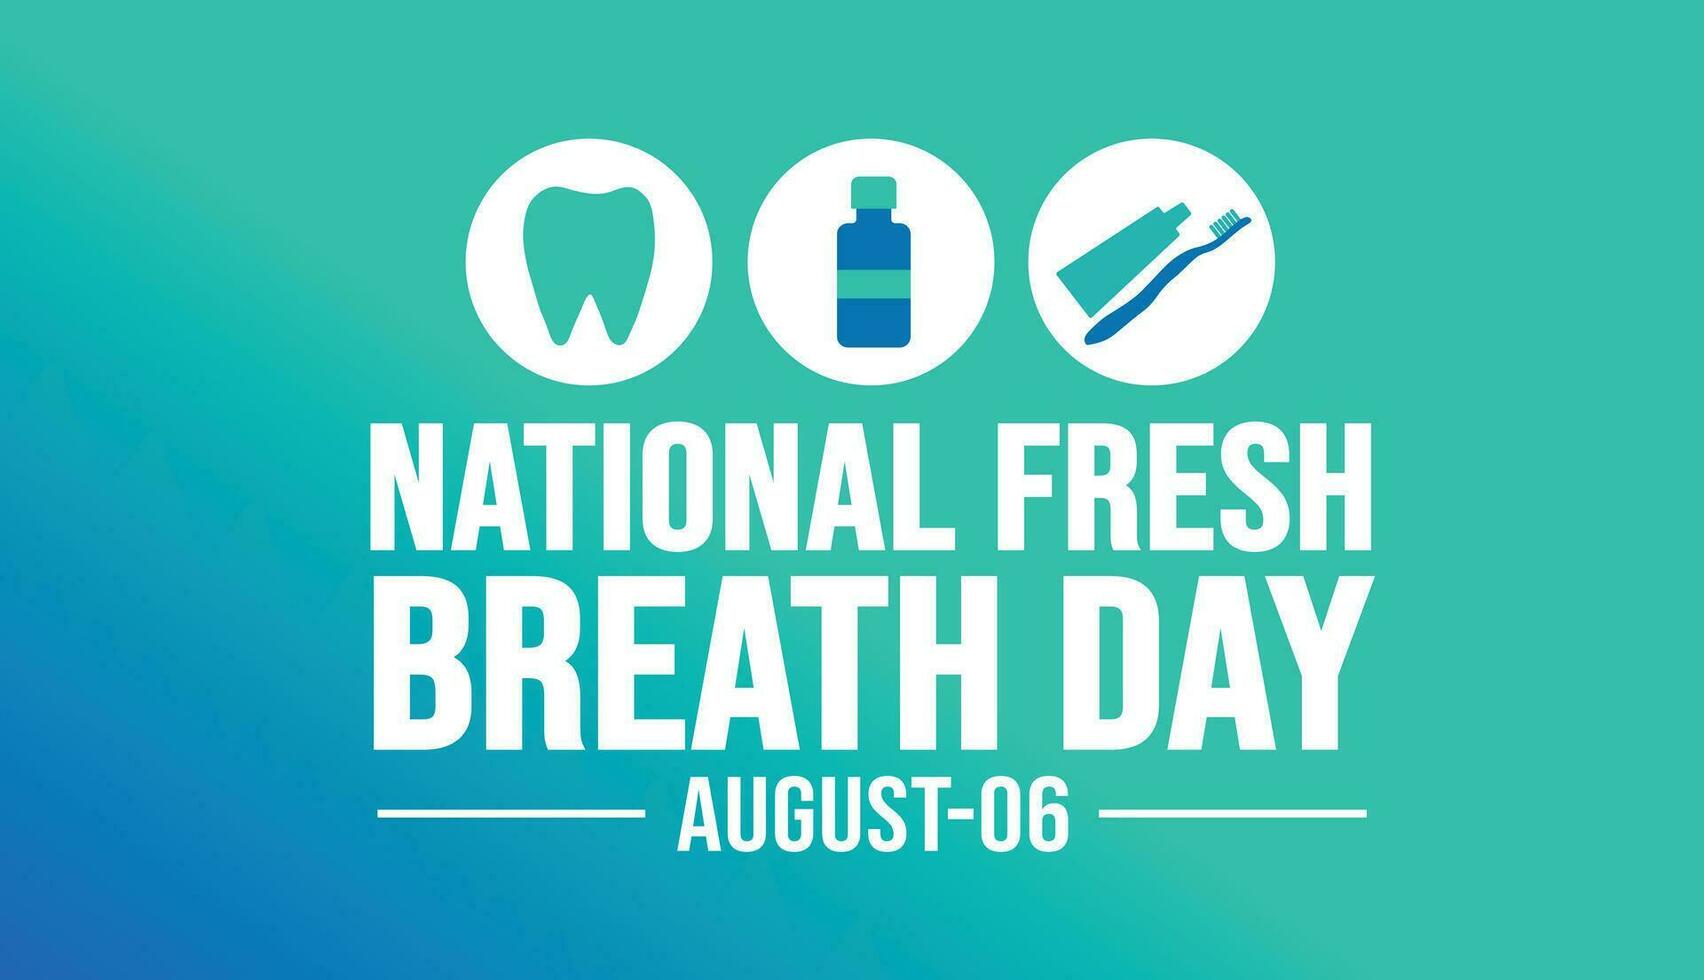 National Fresh Breath Day background template. Holiday concept. background, banner, placard, card, and poster design template with text inscription and standard color. vector illustration.